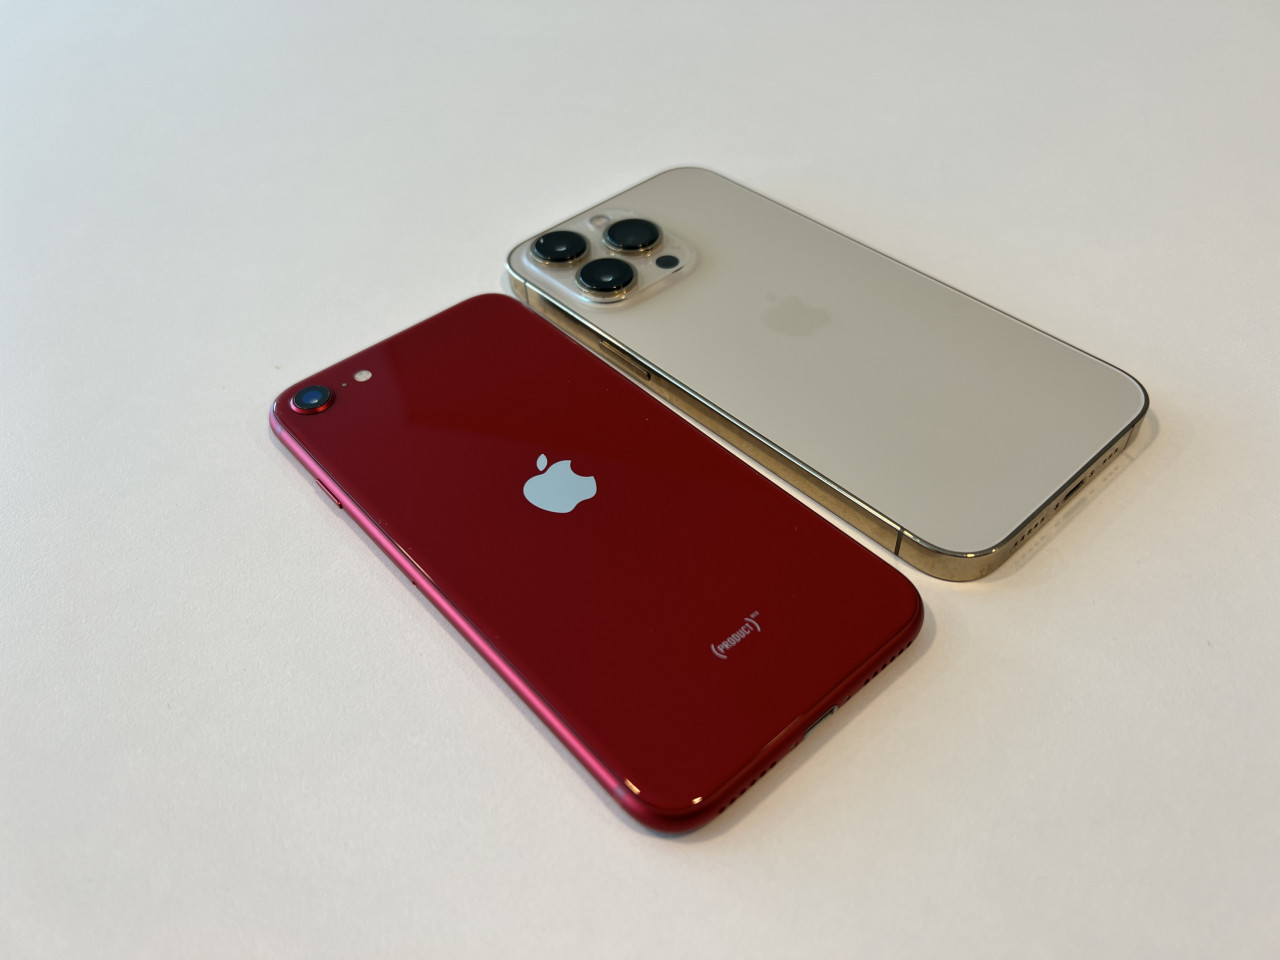 A size comparison between iPhone SE and iPhone 13 Pro. The SE has a single 12MP camera, compared to the Pro's three camera design. – Haikal Fernandez pic